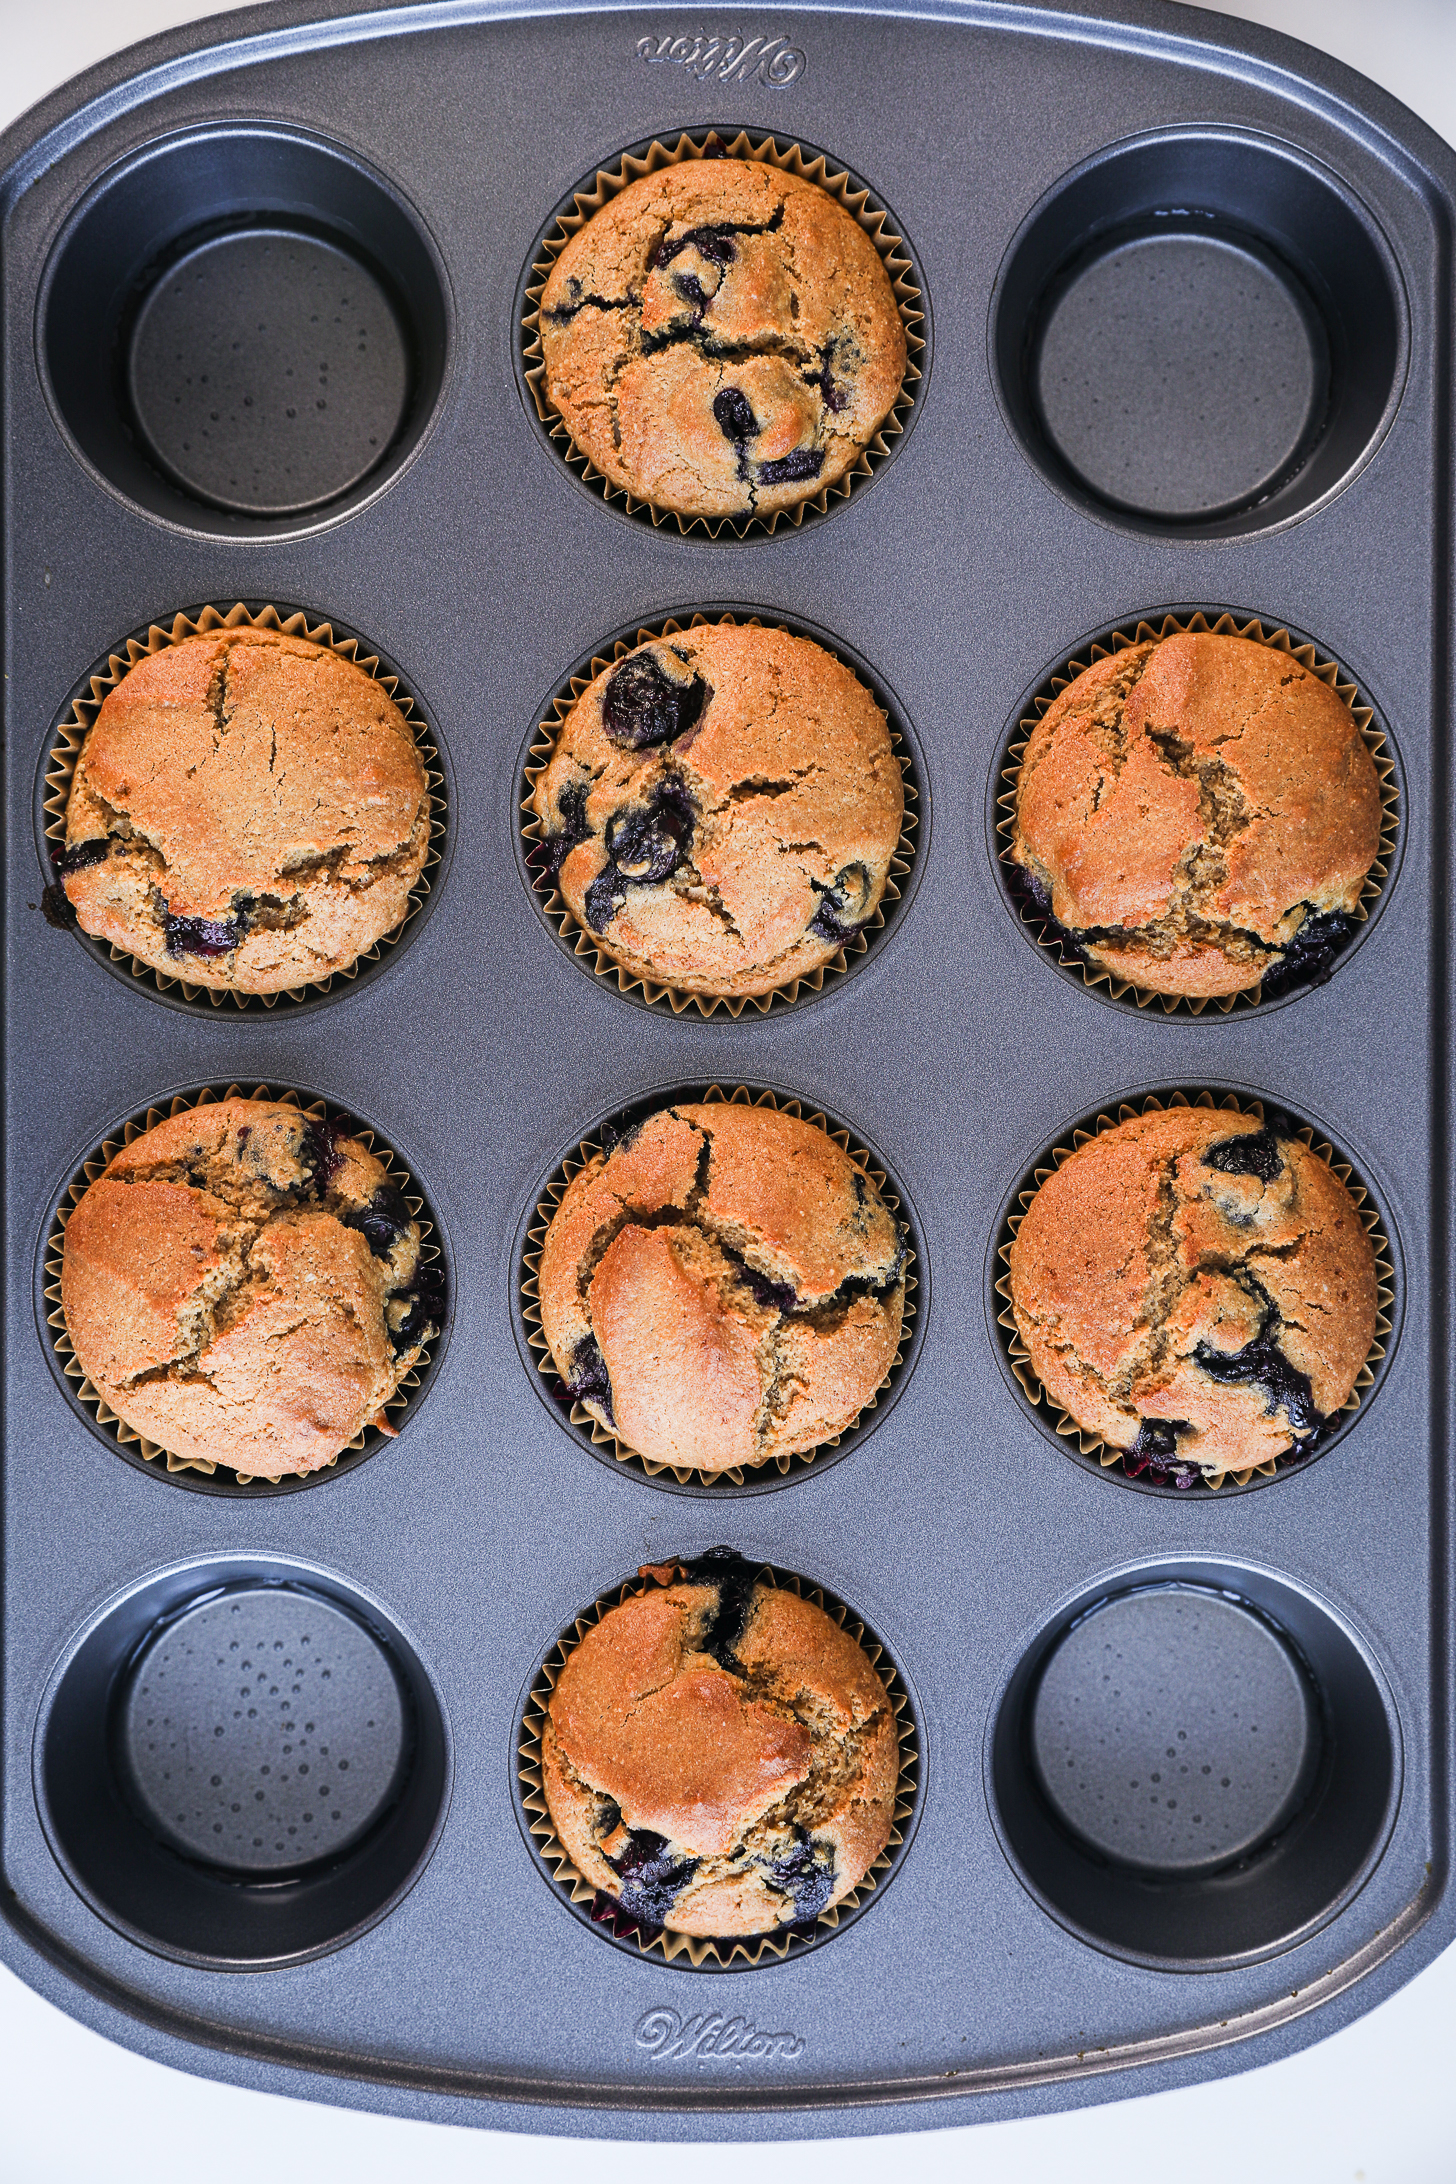 A cup cake tray with baked blueberry muffins.